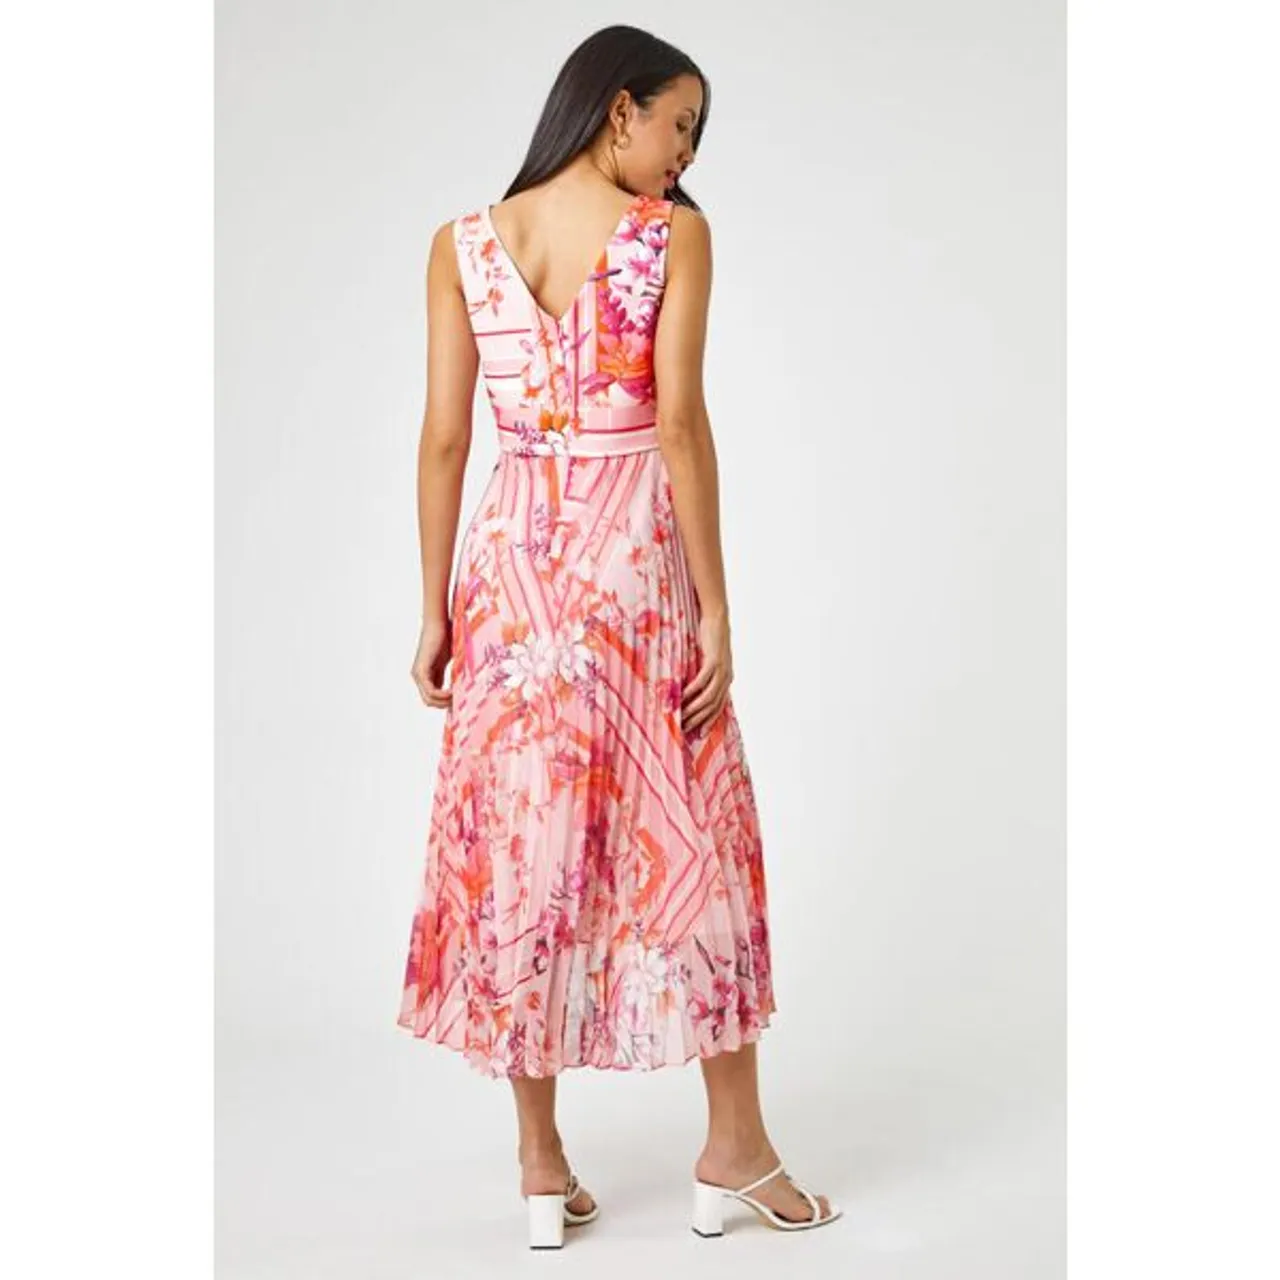 Roman Floral Print Fit And Flare Pleated Dress in Pink - Size 10 10 female